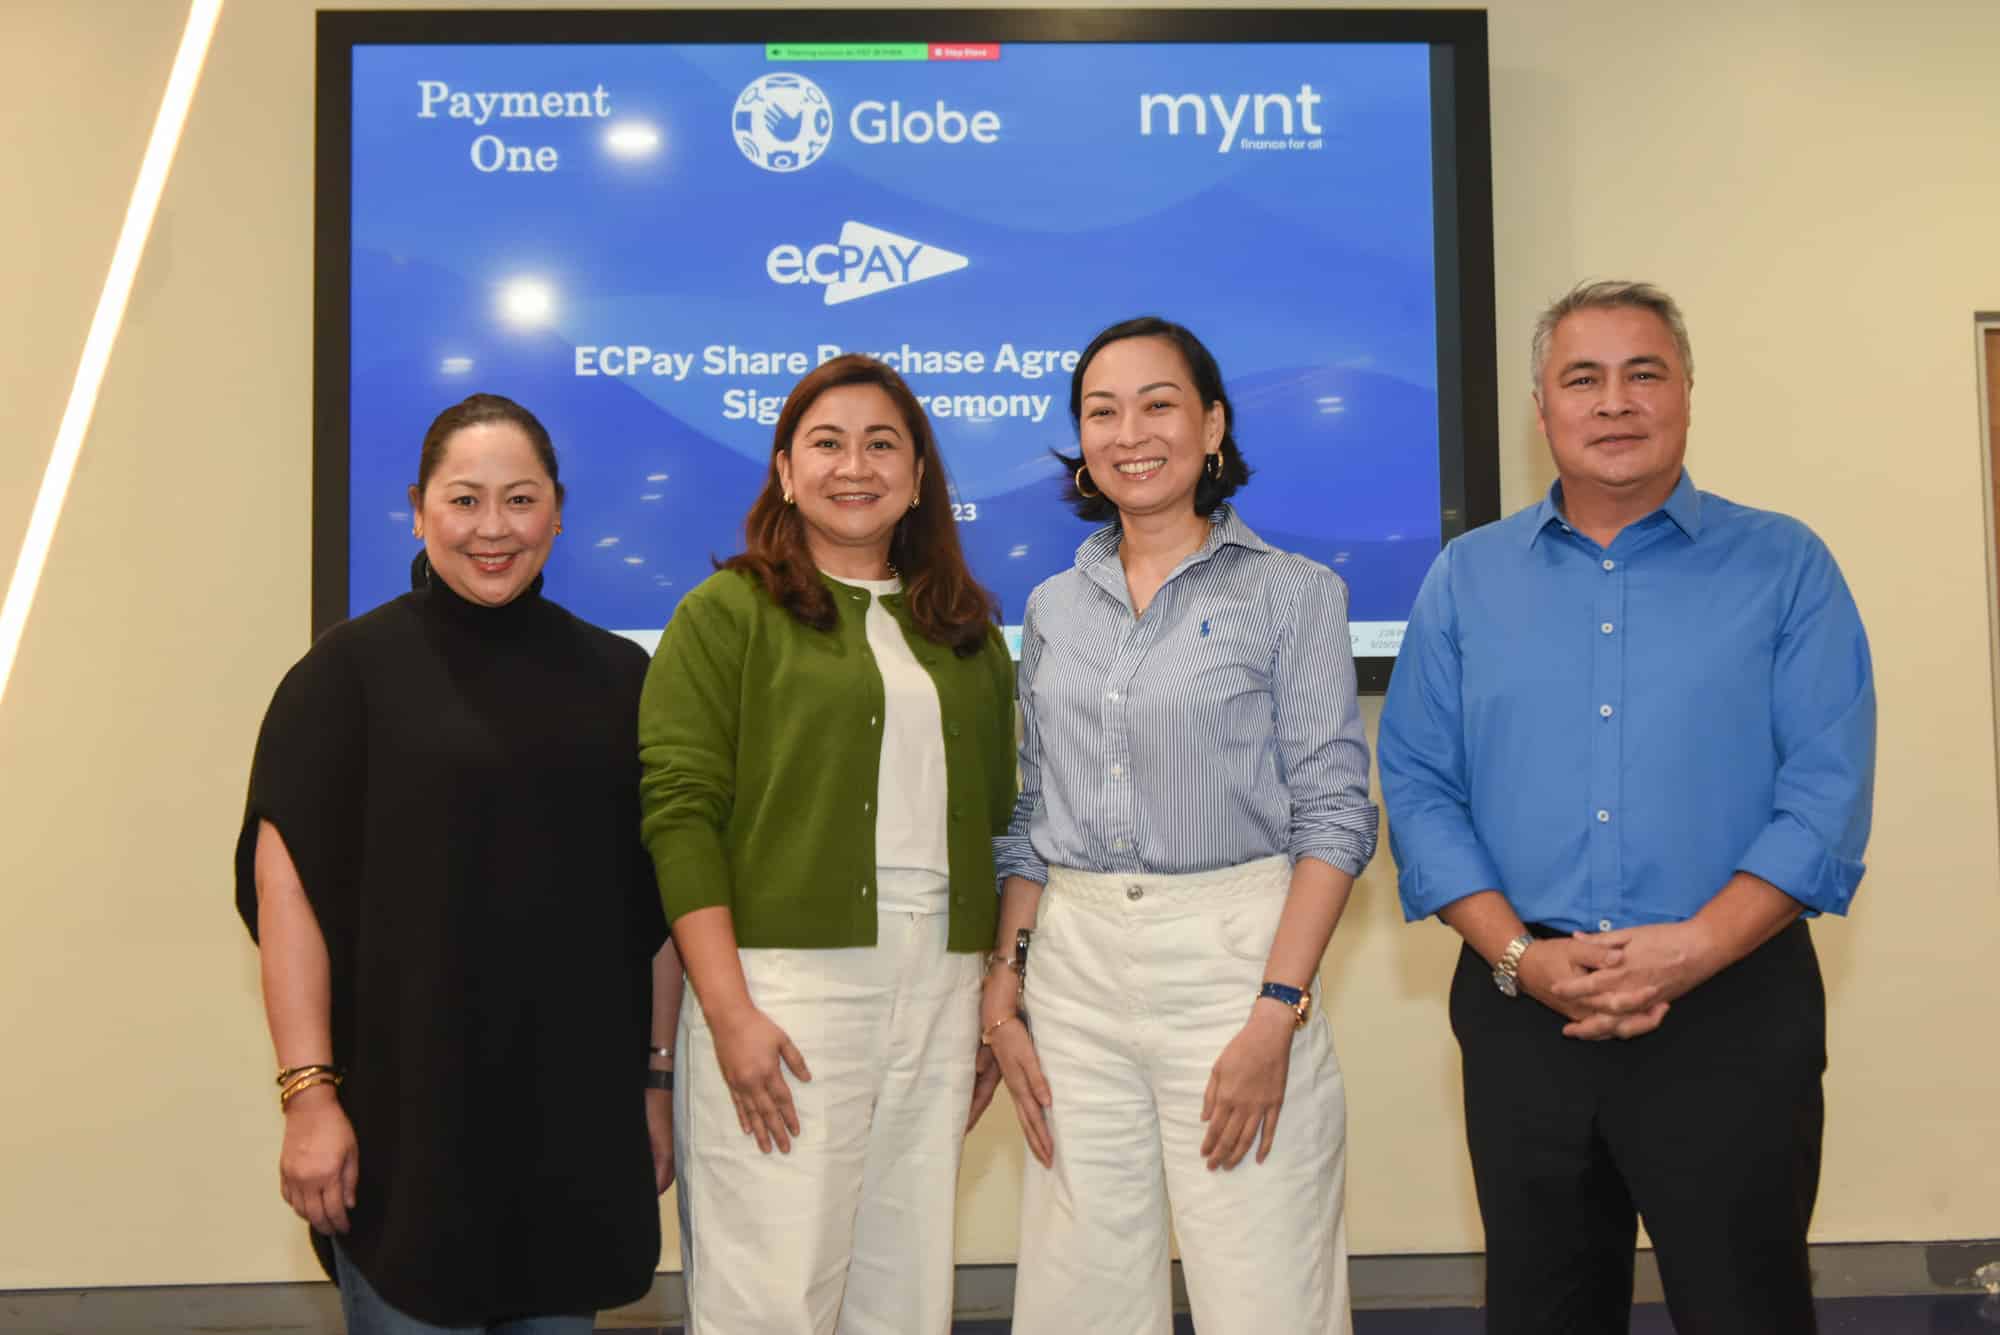 Mynt to acquire ECPay to serve MSMEs better, boost bills payment business